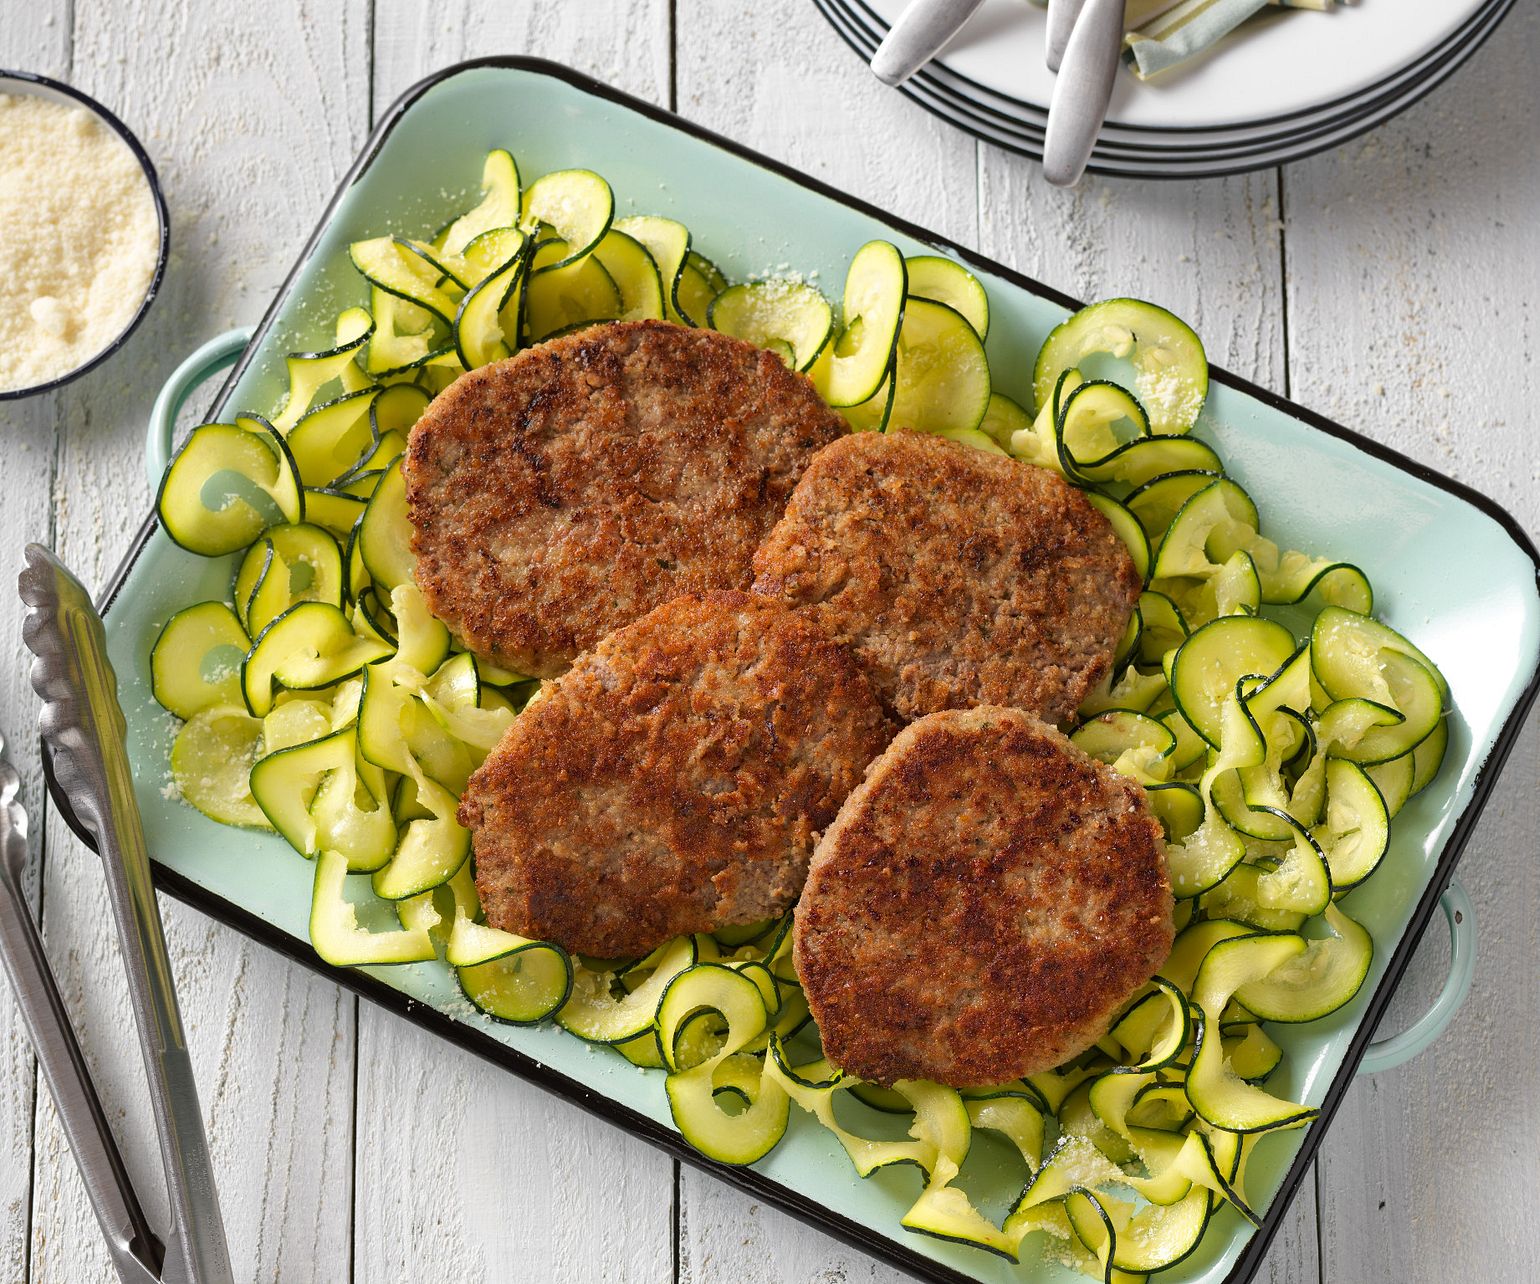 Parmesan-Crusted Cubed Steaks with Zucchini Ribbons